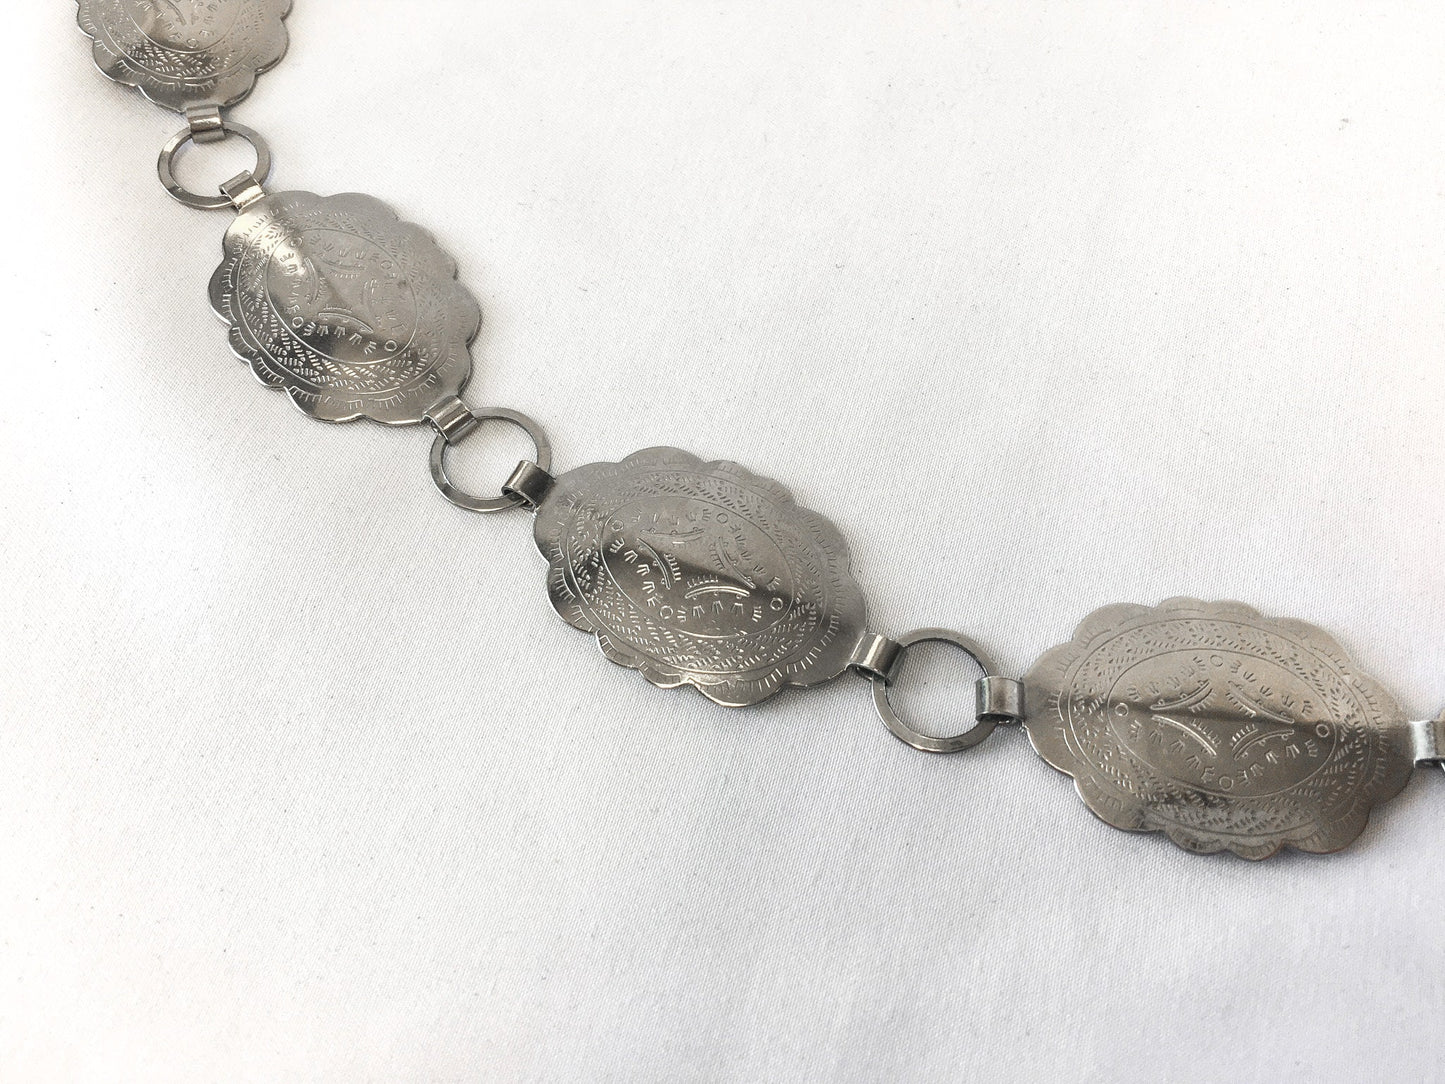 Vintage 60s/70s Silver Toned Concho Chain Link Belt with Engraving Detail, Vintage Boho Style Belt